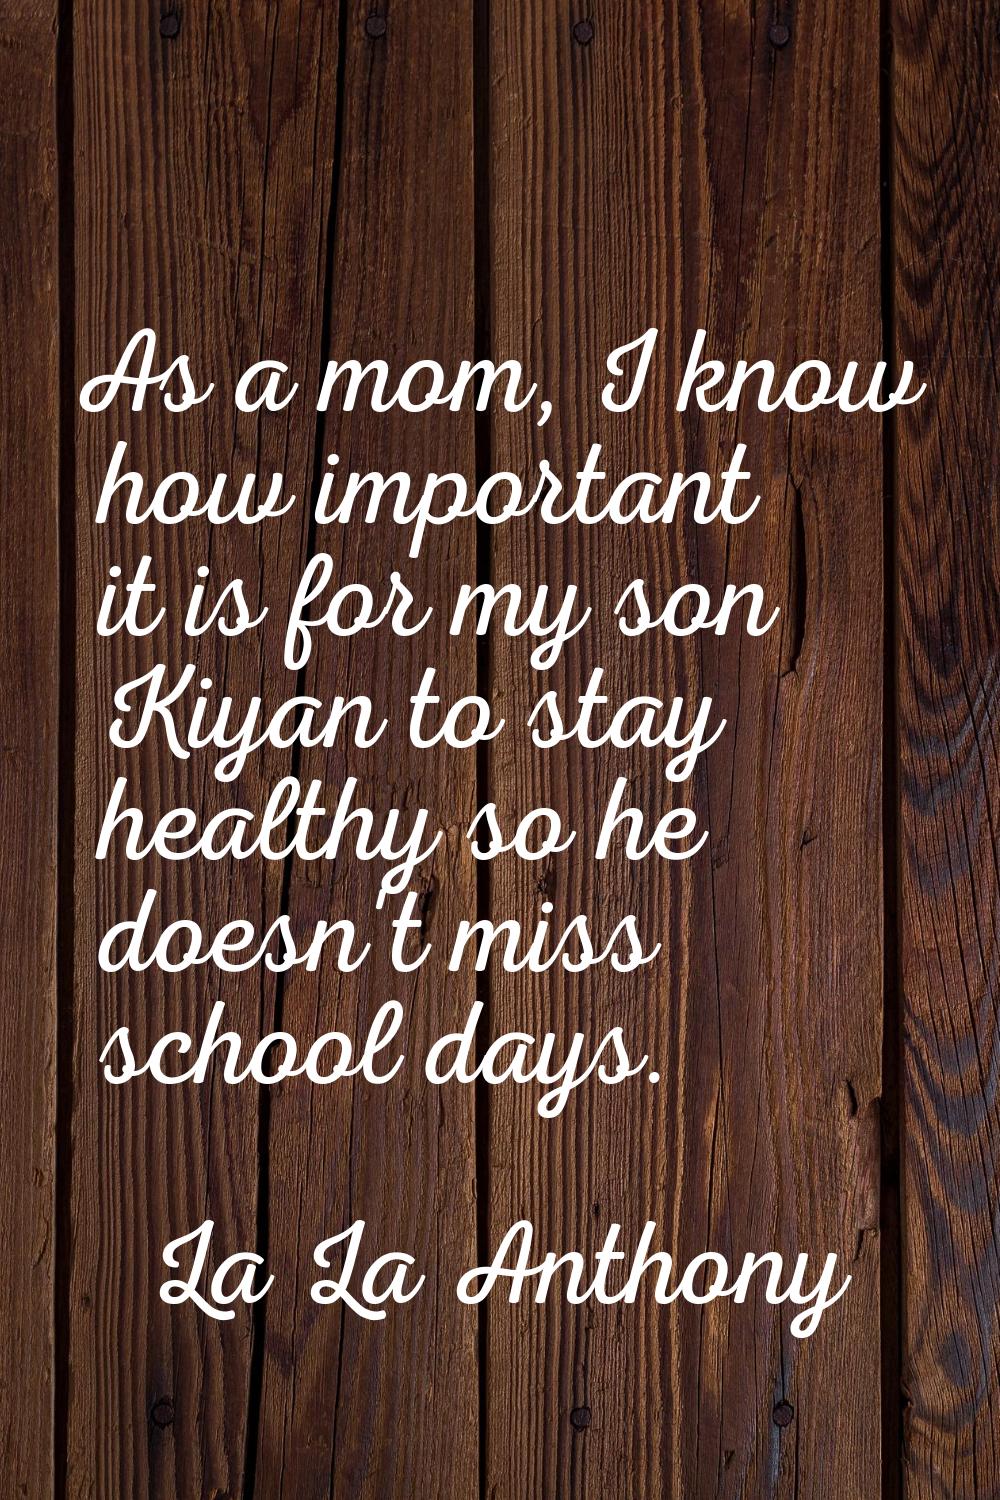 As a mom, I know how important it is for my son Kiyan to stay healthy so he doesn't miss school day